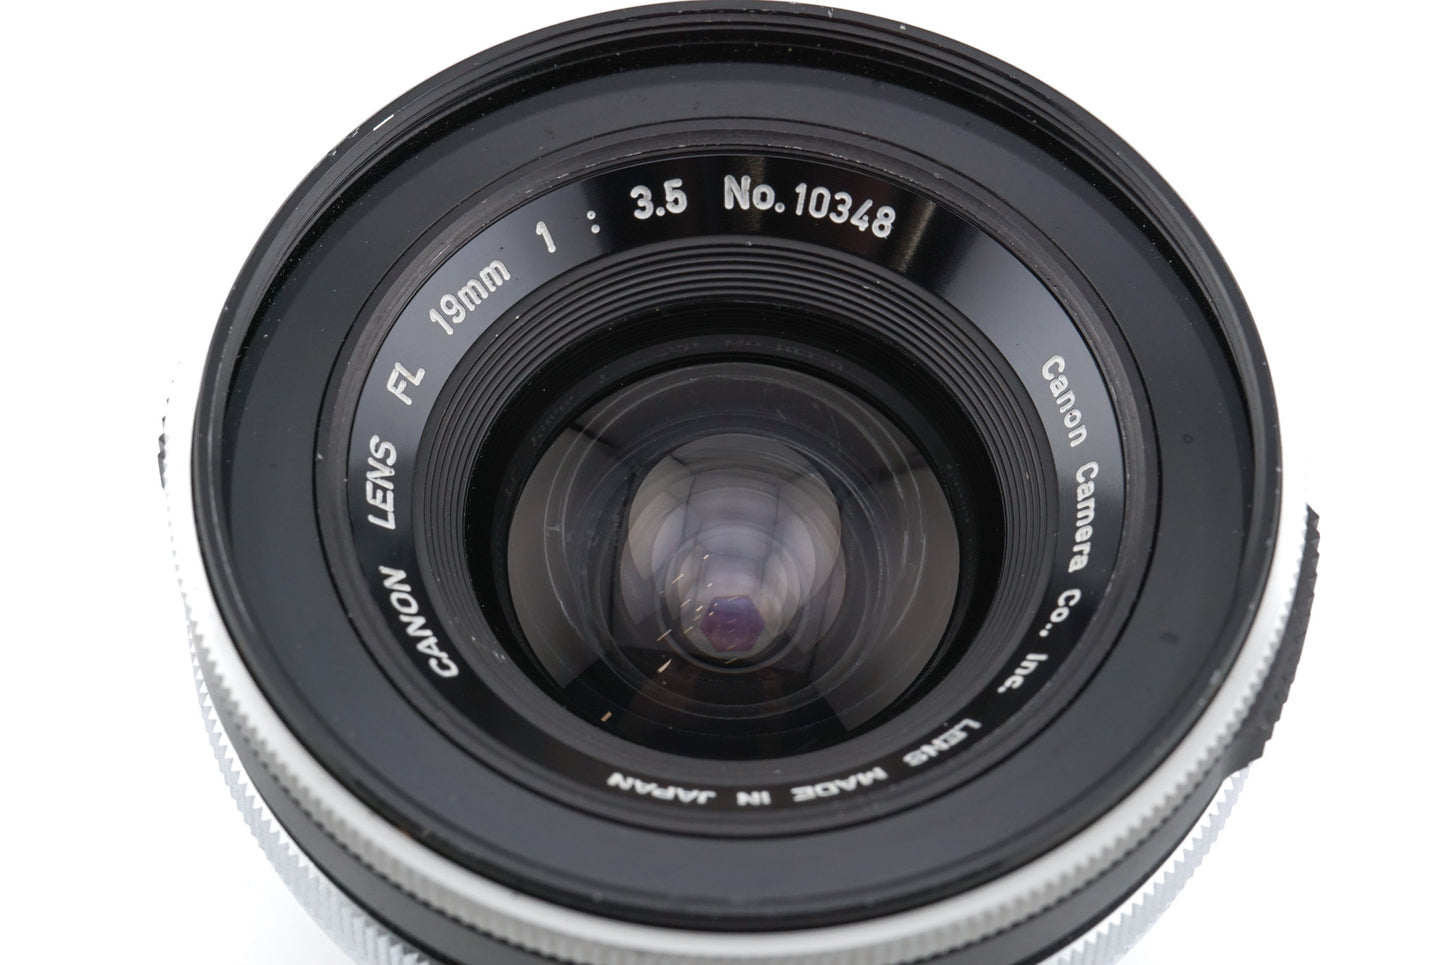 Canon 19mm f3.5 FL + 19mm Optical Viewfinder